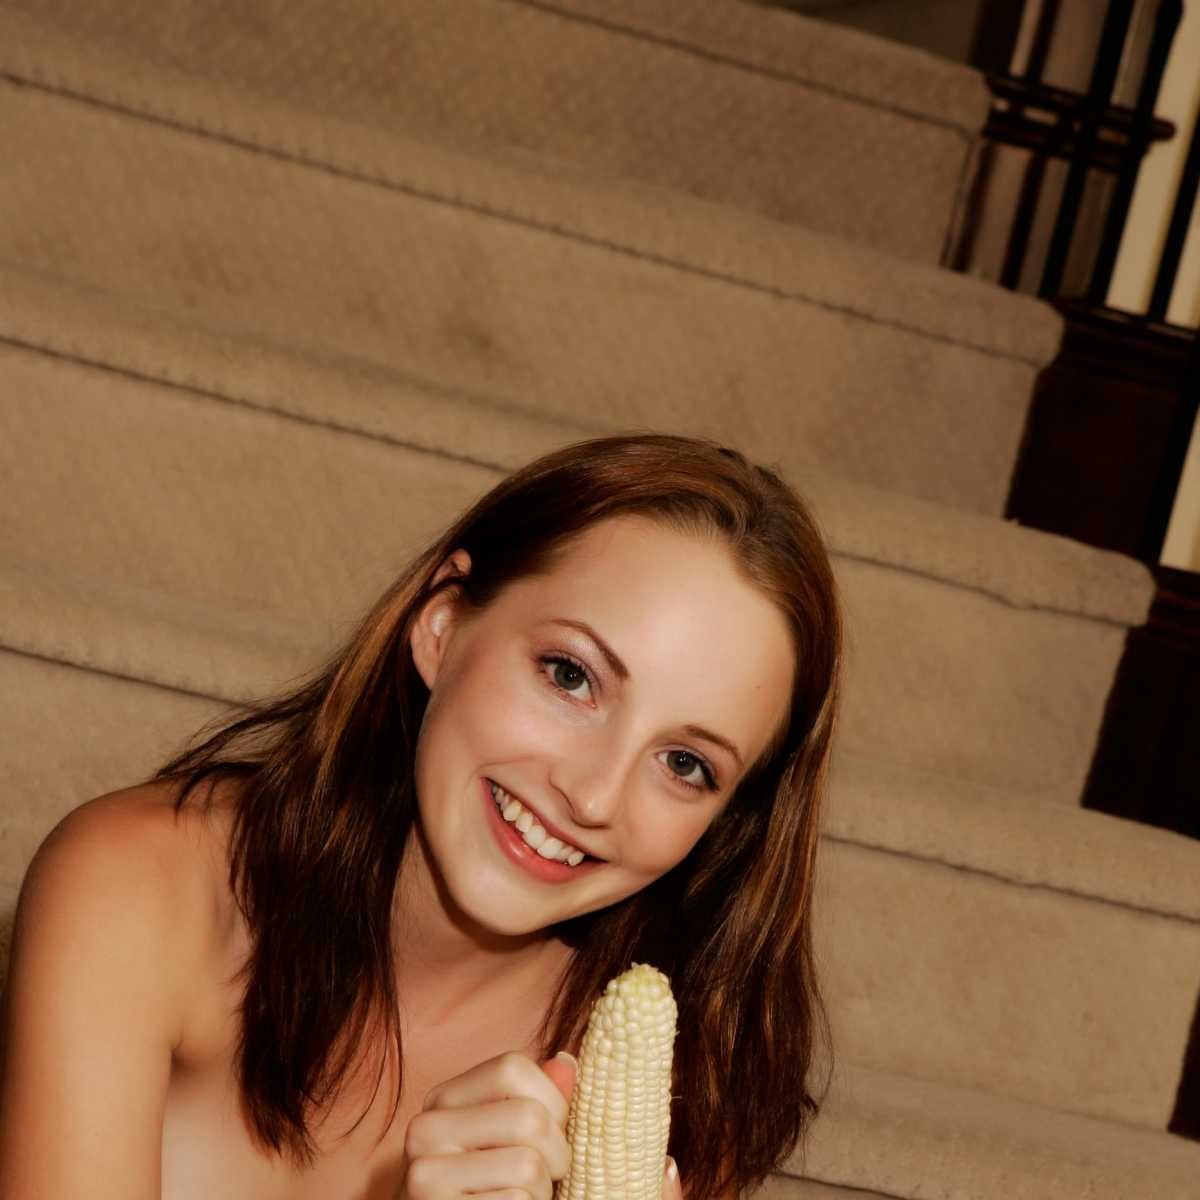 Tiny Tabitha corn fucker this girl knows how to shuck and fuck corn you have to  #77141182